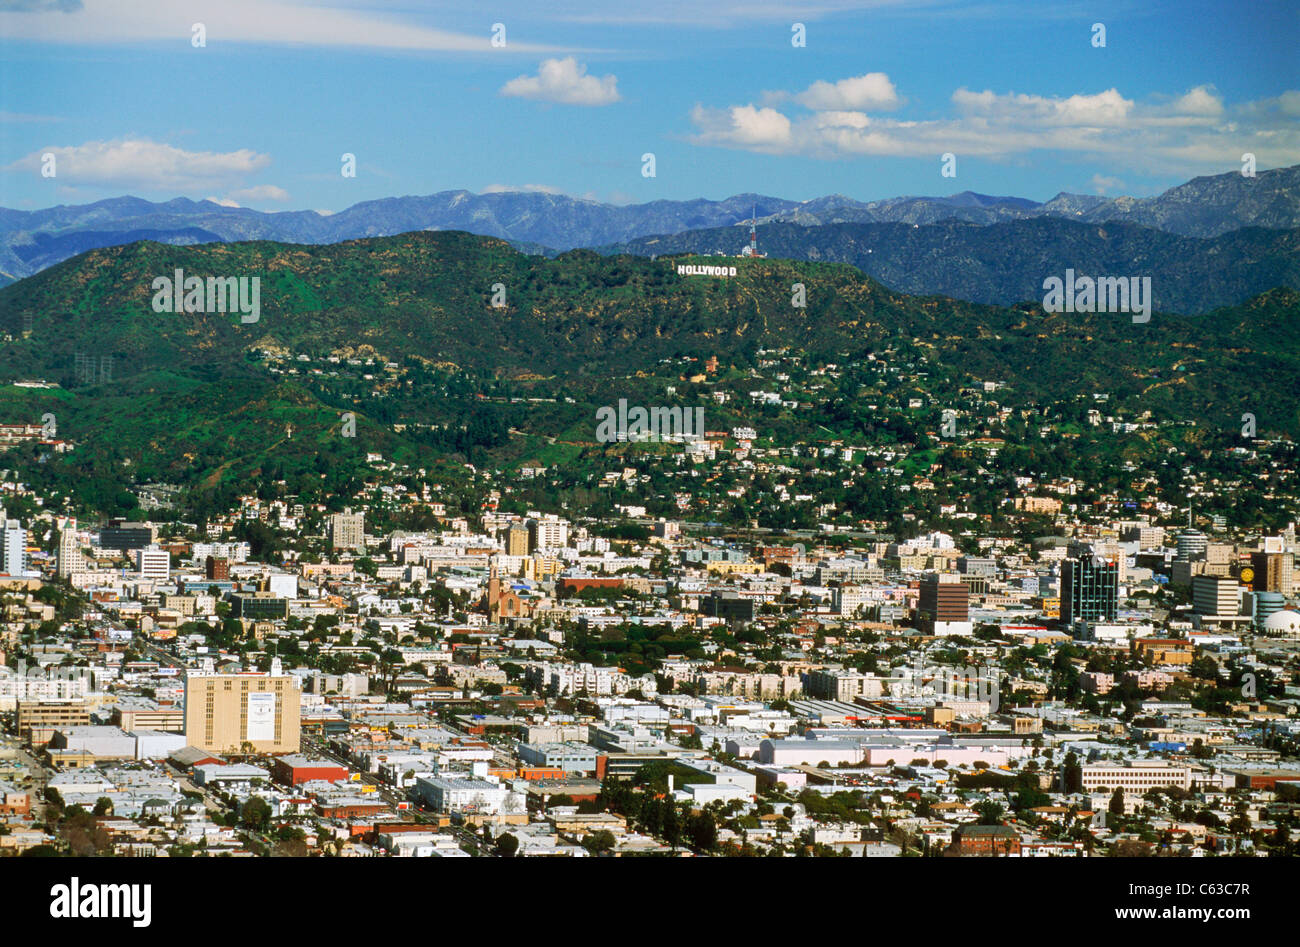 Aerial view of Brentwood with exclusive hillside homes below Hollywood sign along base of the Santa Monica Mountains California Stock Photo